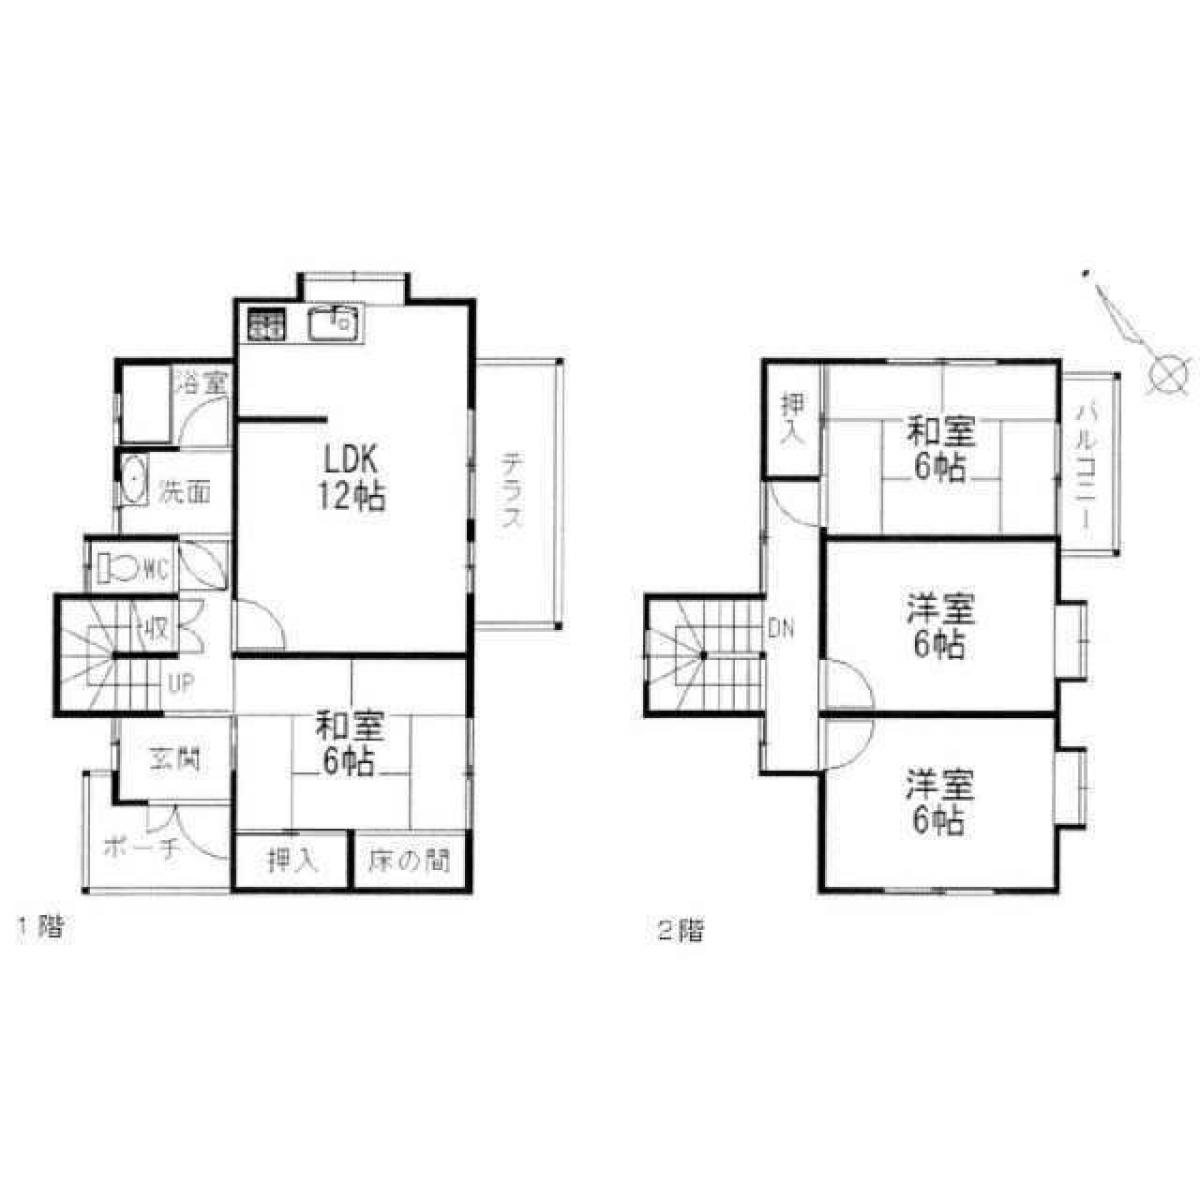 Picture of Home For Sale in Kako Gun Harima Cho, Hyogo, Japan